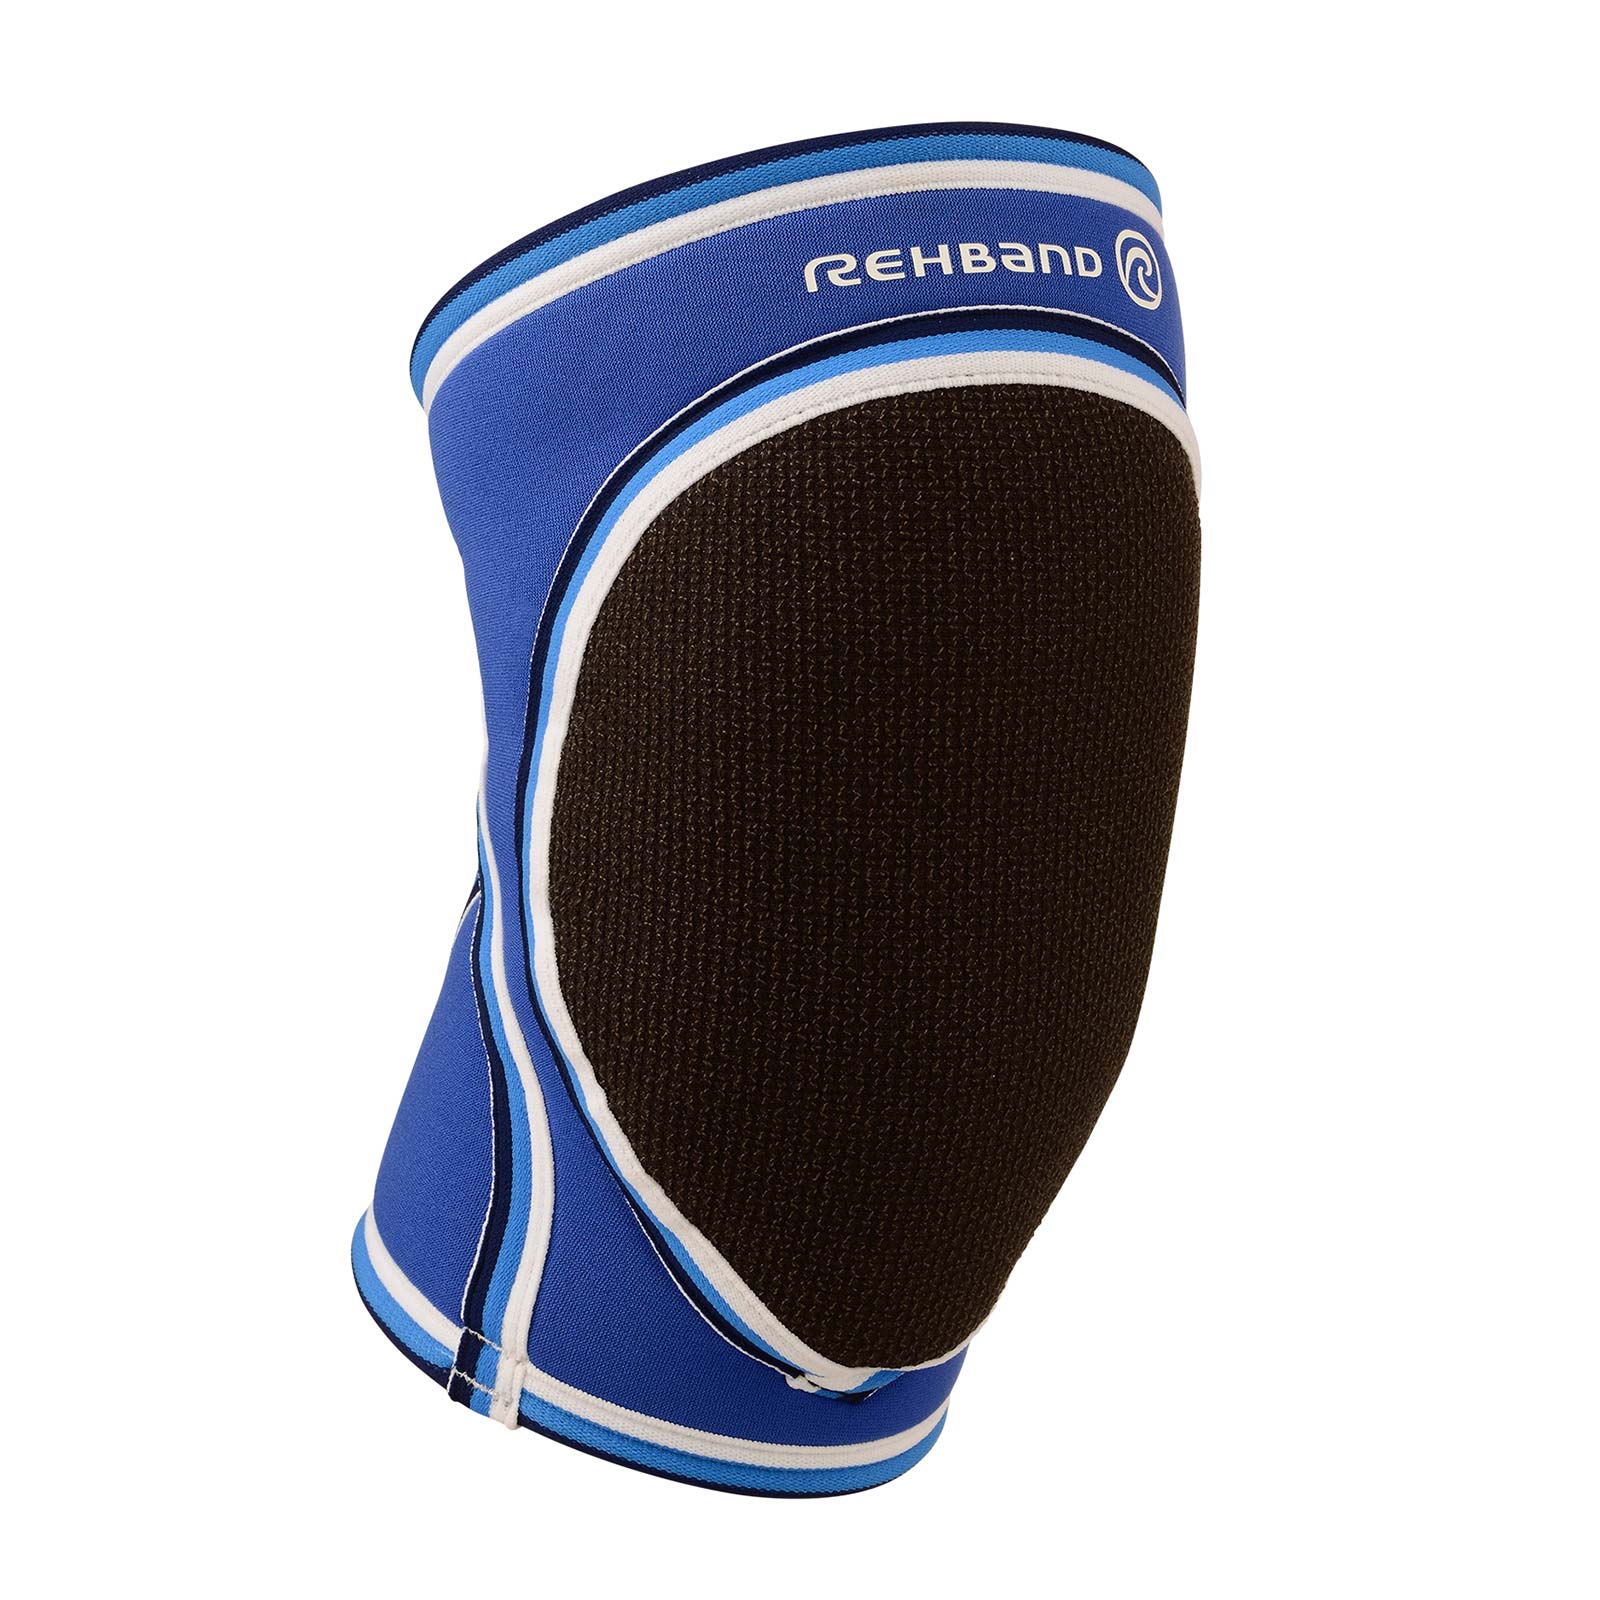 A blue padded knee sleeve with white Rehband lettering and logo on the top